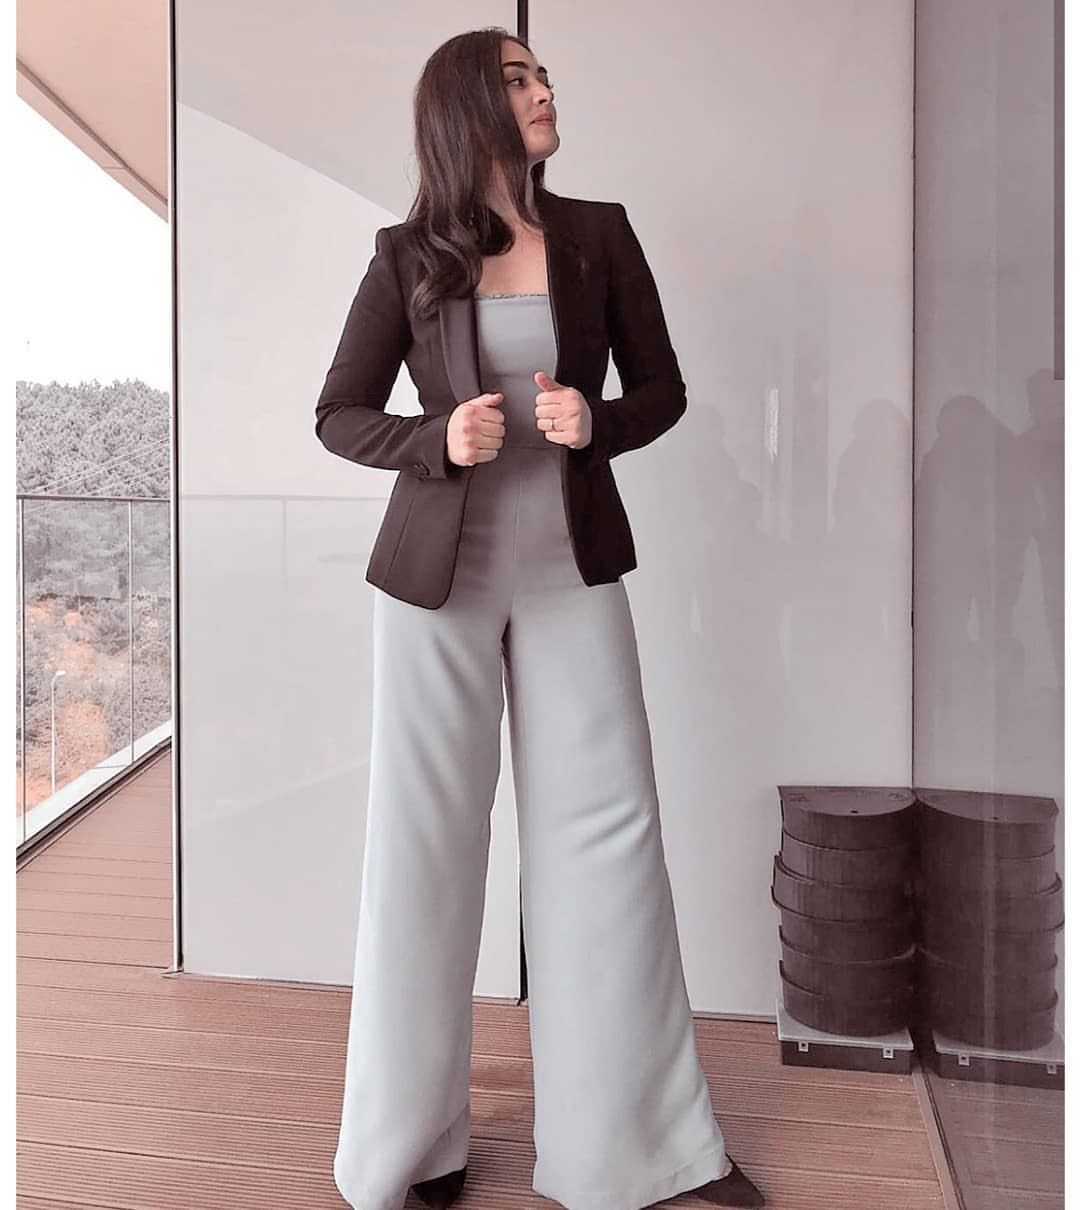 Esra Bilgic Can Wear Anything From Simple to Bold For Stunning Looks!